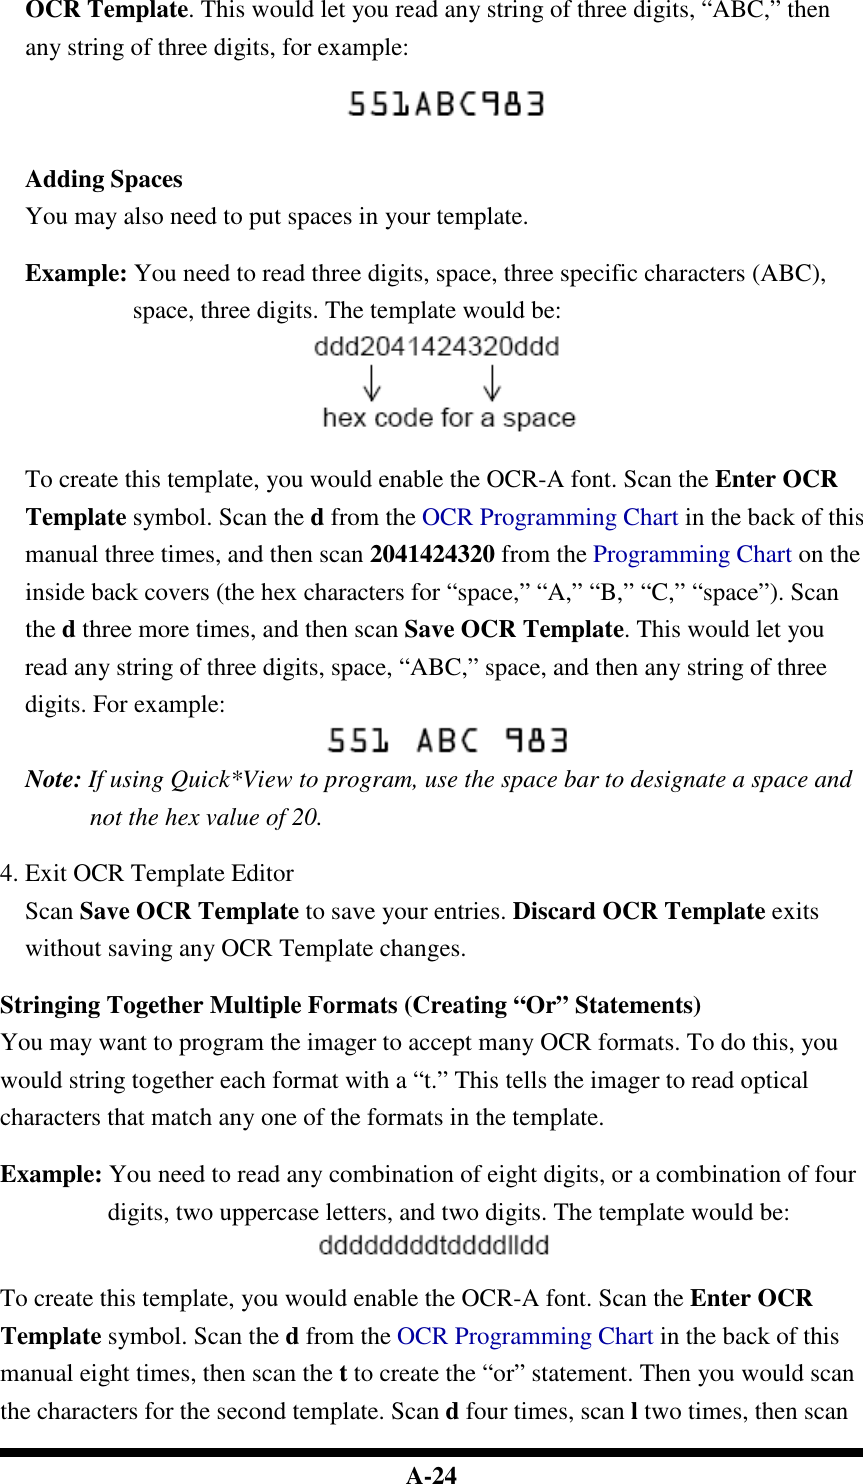  A-24 OCR Template. This would let you read any string of three digits, “ABC,” then any string of three digits, for example:   Adding Spaces You may also need to put spaces in your template.  Example: You need to read three digits, space, three specific characters (ABC), space, three digits. The template would be:   To create this template, you would enable the OCR-A font. Scan the Enter OCR Template symbol. Scan the d from the OCR Programming Chart in the back of this manual three times, and then scan 2041424320 from the Programming Chart on the inside back covers (the hex characters for “space,” “A,” “B,” “C,” “space”). Scan the d three more times, and then scan Save OCR Template. This would let you read any string of three digits, space, “ABC,” space, and then any string of three digits. For example:  Note: If using Quick*View to program, use the space bar to designate a space and not the hex value of 20.  4. Exit OCR Template Editor Scan Save OCR Template to save your entries. Discard OCR Template exits without saving any OCR Template changes.  Stringing Together Multiple Formats (Creating “Or” Statements) You may want to program the imager to accept many OCR formats. To do this, you would string together each format with a “t.” This tells the imager to read optical characters that match any one of the formats in the template.  Example: You need to read any combination of eight digits, or a combination of four digits, two uppercase letters, and two digits. The template would be:   To create this template, you would enable the OCR-A font. Scan the Enter OCR Template symbol. Scan the d from the OCR Programming Chart in the back of this manual eight times, then scan the t to create the “or” statement. Then you would scan the characters for the second template. Scan d four times, scan l two times, then scan 